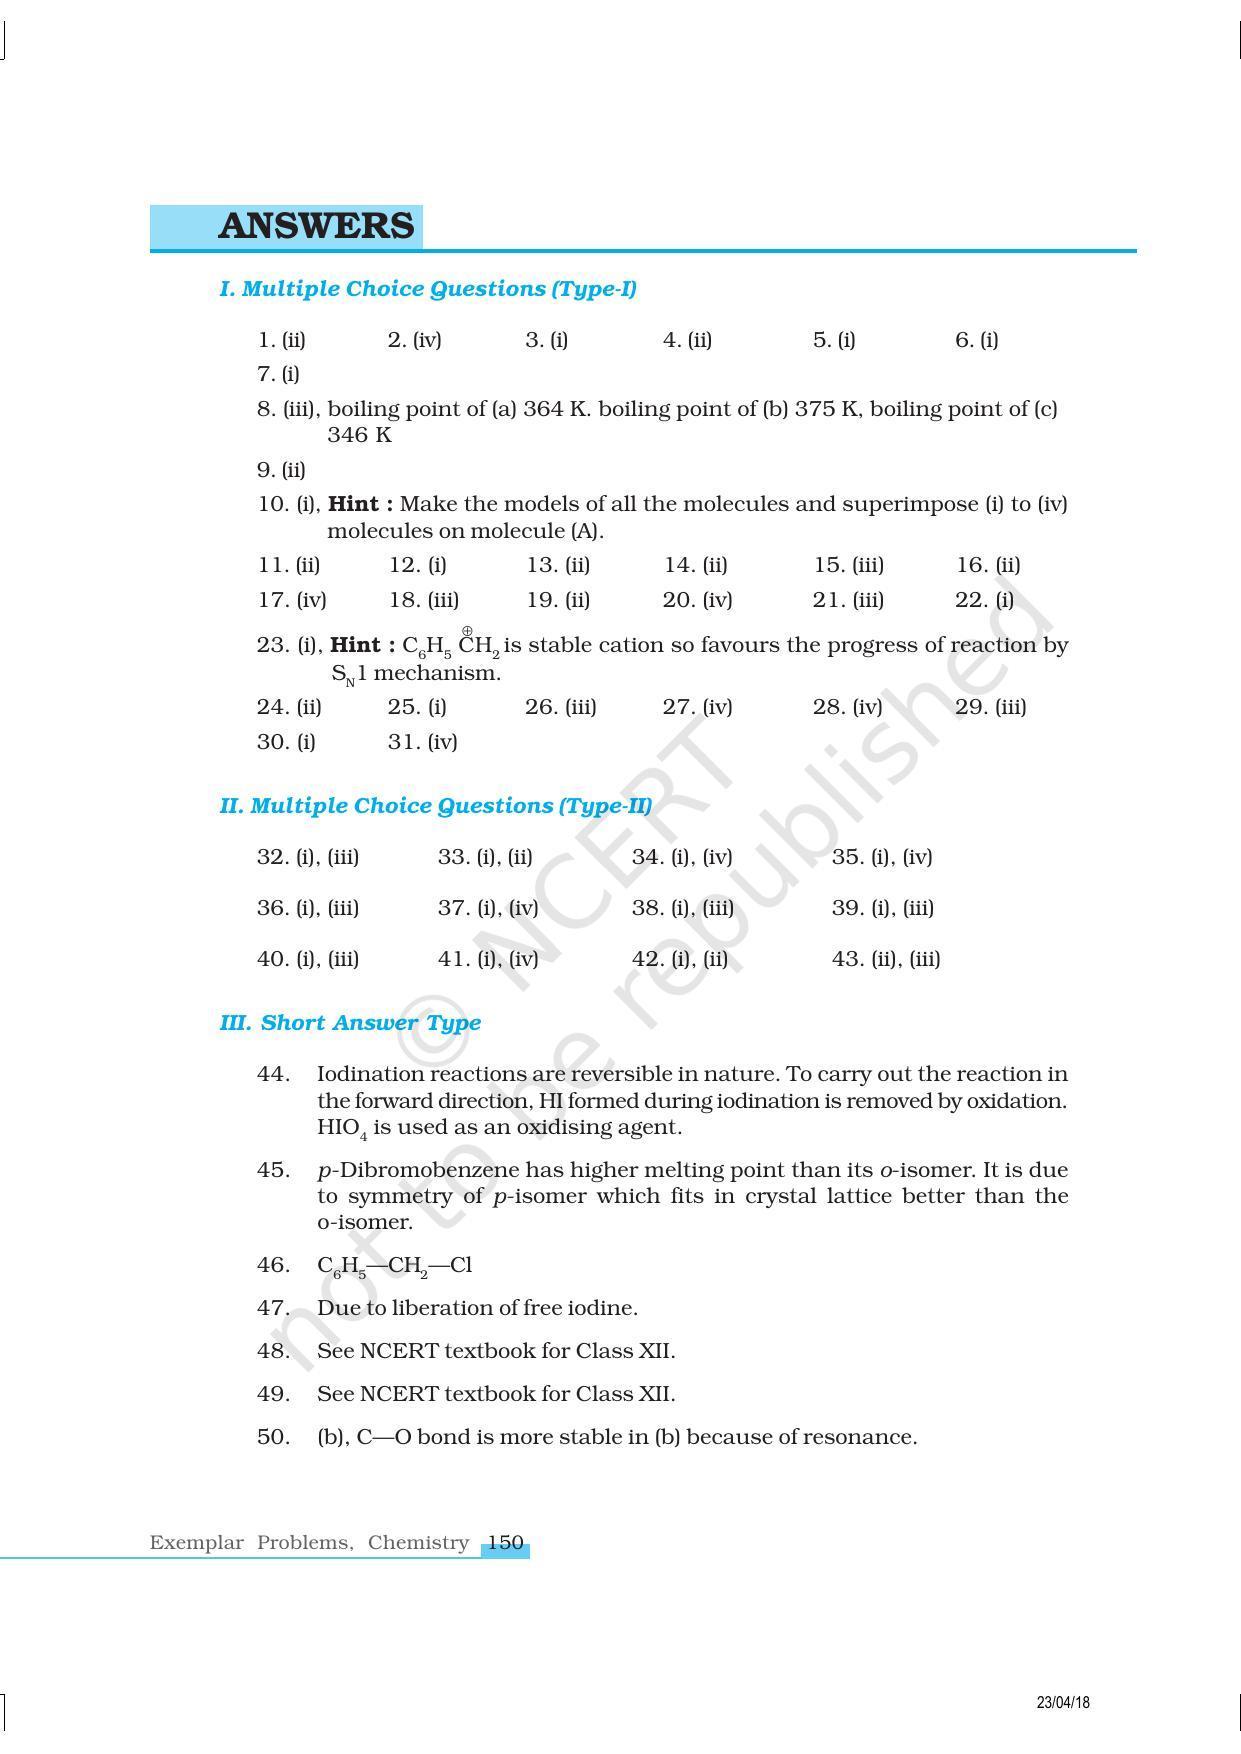 NCERT Exemplar Book for Class 12 Chemistry: Chapter 10 Haloalkanes and Haloarenes - Page 18